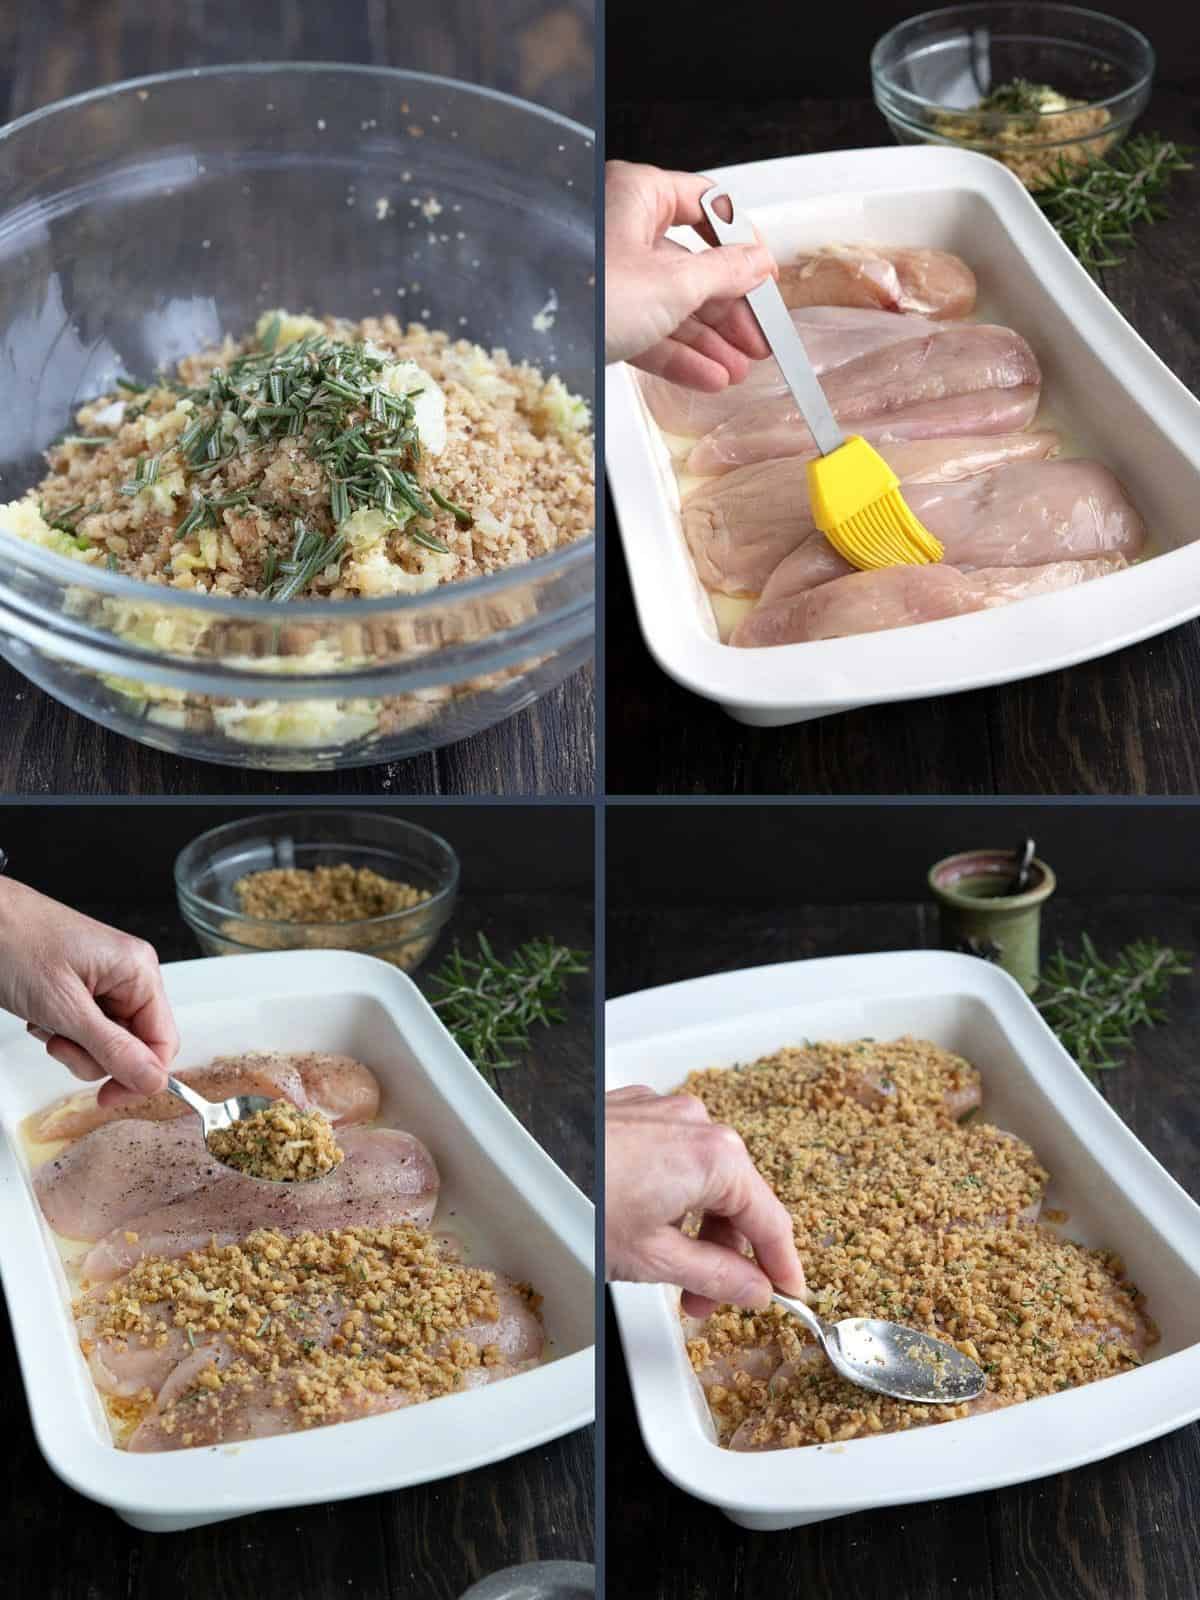 Four images showing the steps for making walnut crusted chicken.